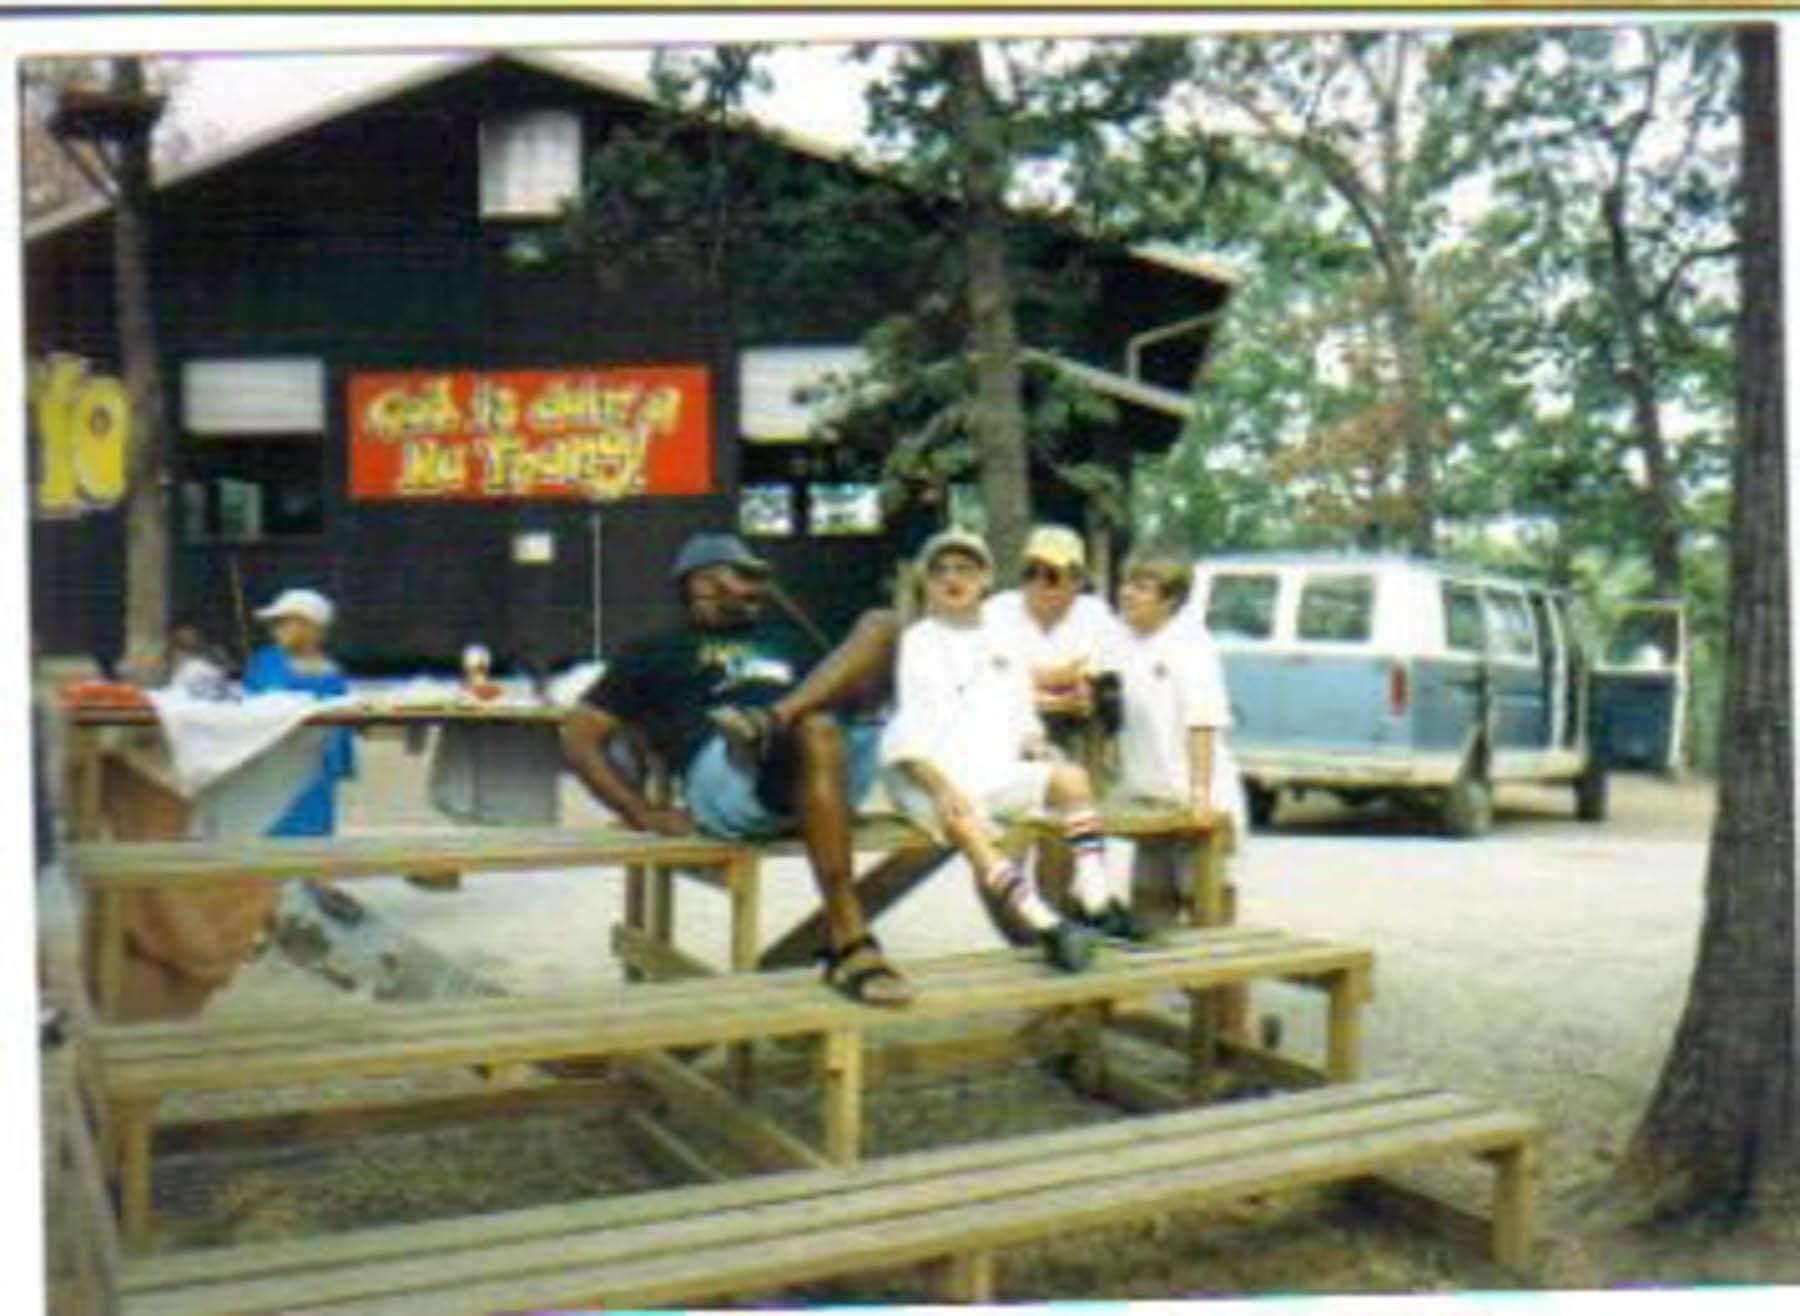 Camp counselors sitting on bleachers at Camp Barnabas